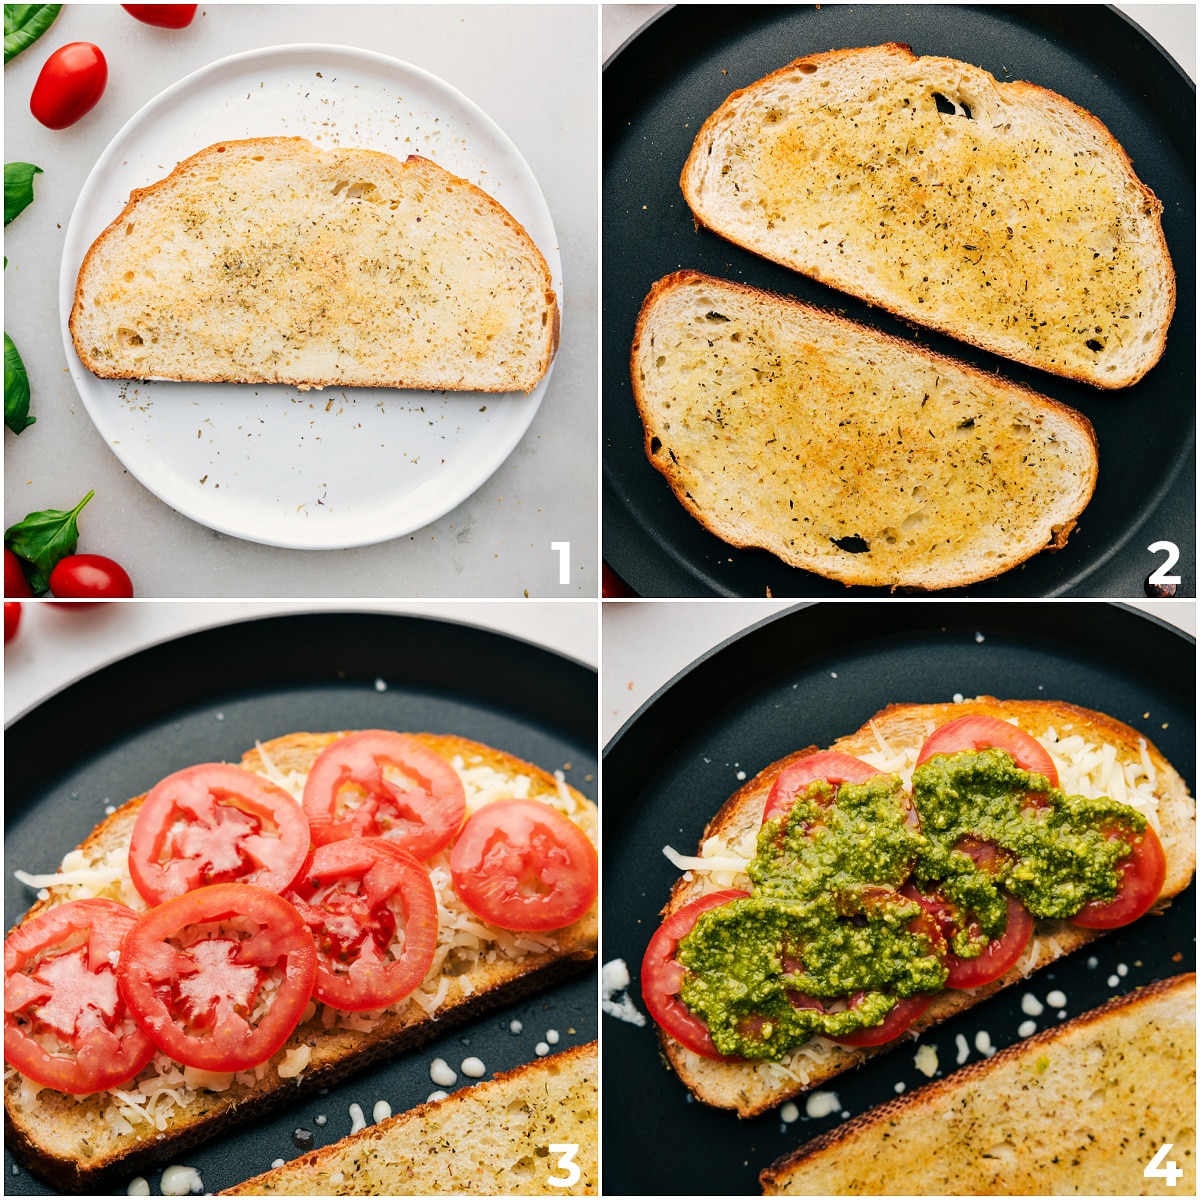 The bread being butter, seasoned, and cooked in a skillet, then all the ingredients being assembled inside the bread for this Caprese Grilled Cheese.